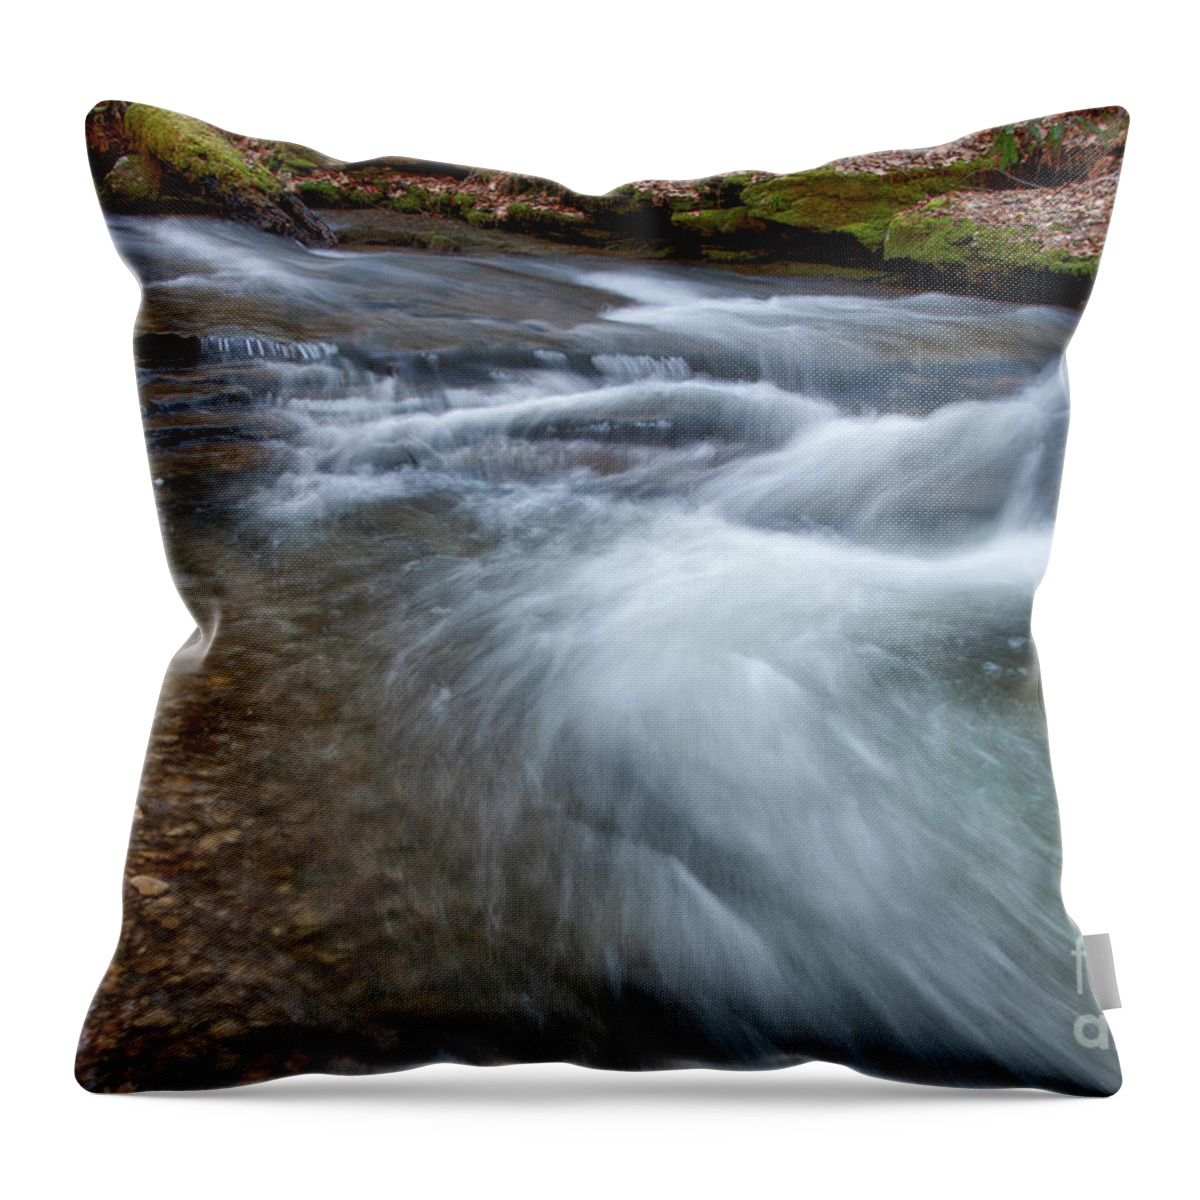 Frozen Head State Park Throw Pillow featuring the photograph Changing Flow by Phil Perkins